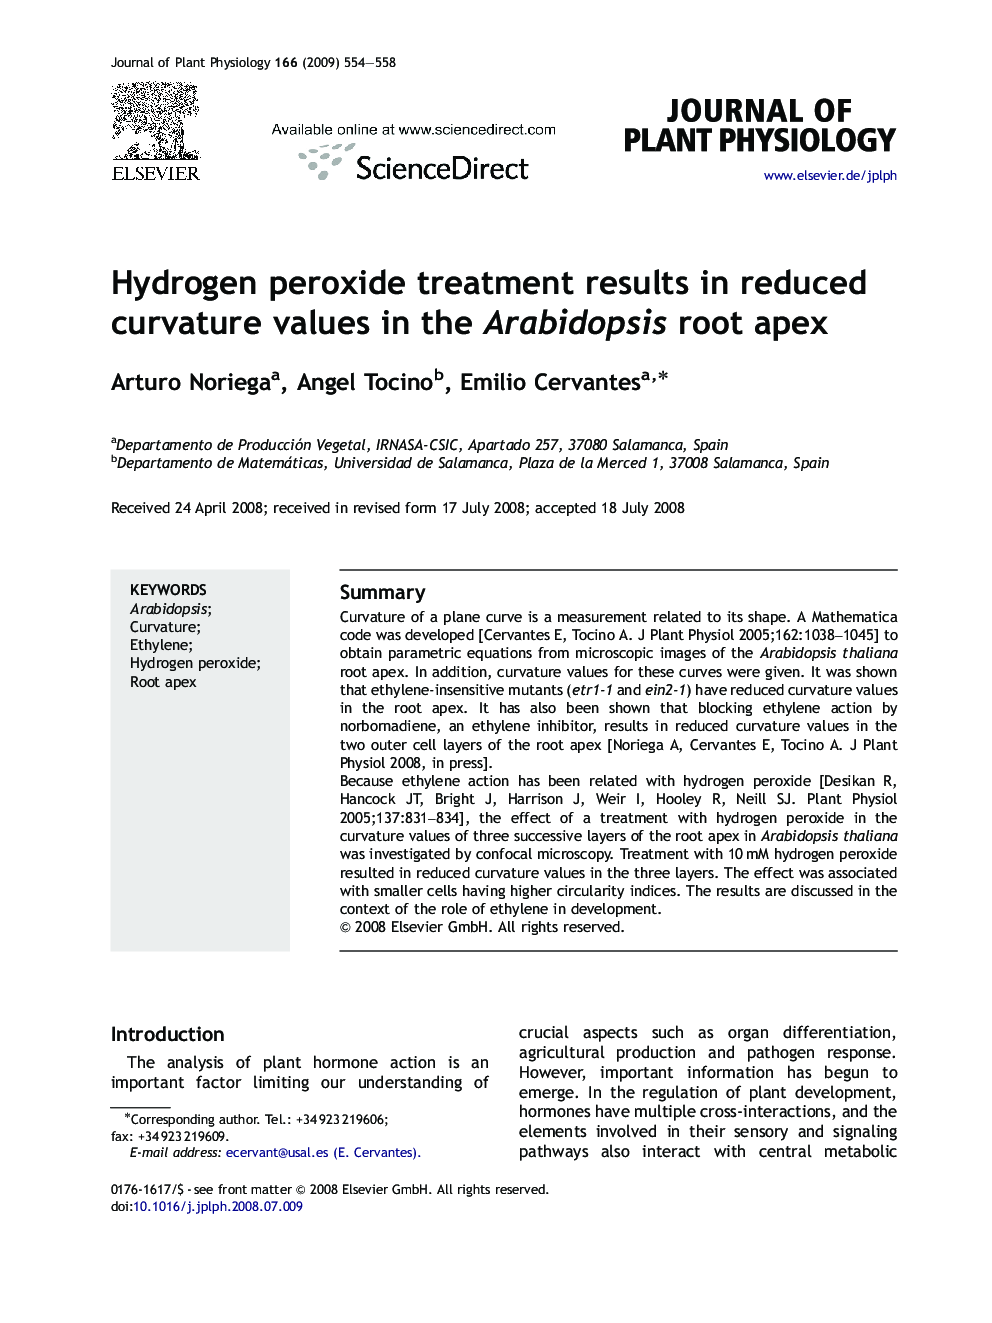 Hydrogen peroxide treatment results in reduced curvature values in the Arabidopsis root apex